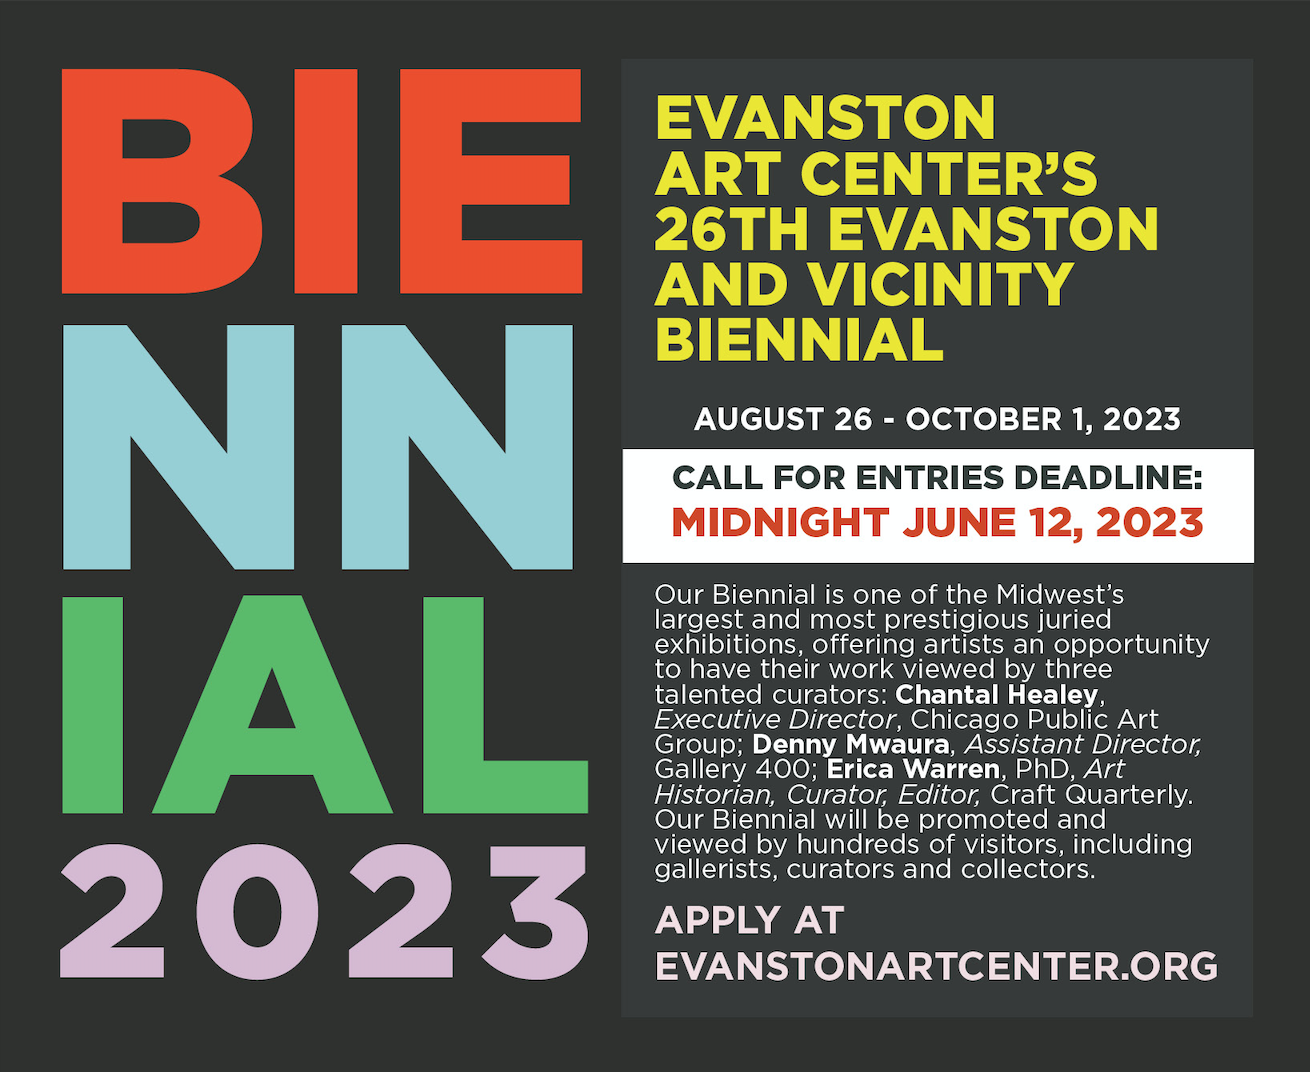 A Graphic composed of colorful text against a dark gray background, reading "The Evanston Art Center 2023 Evanston + Vicinity Biennial Call for Artists", with the new EXTENDED deadline of June 12, 2023, at midnight